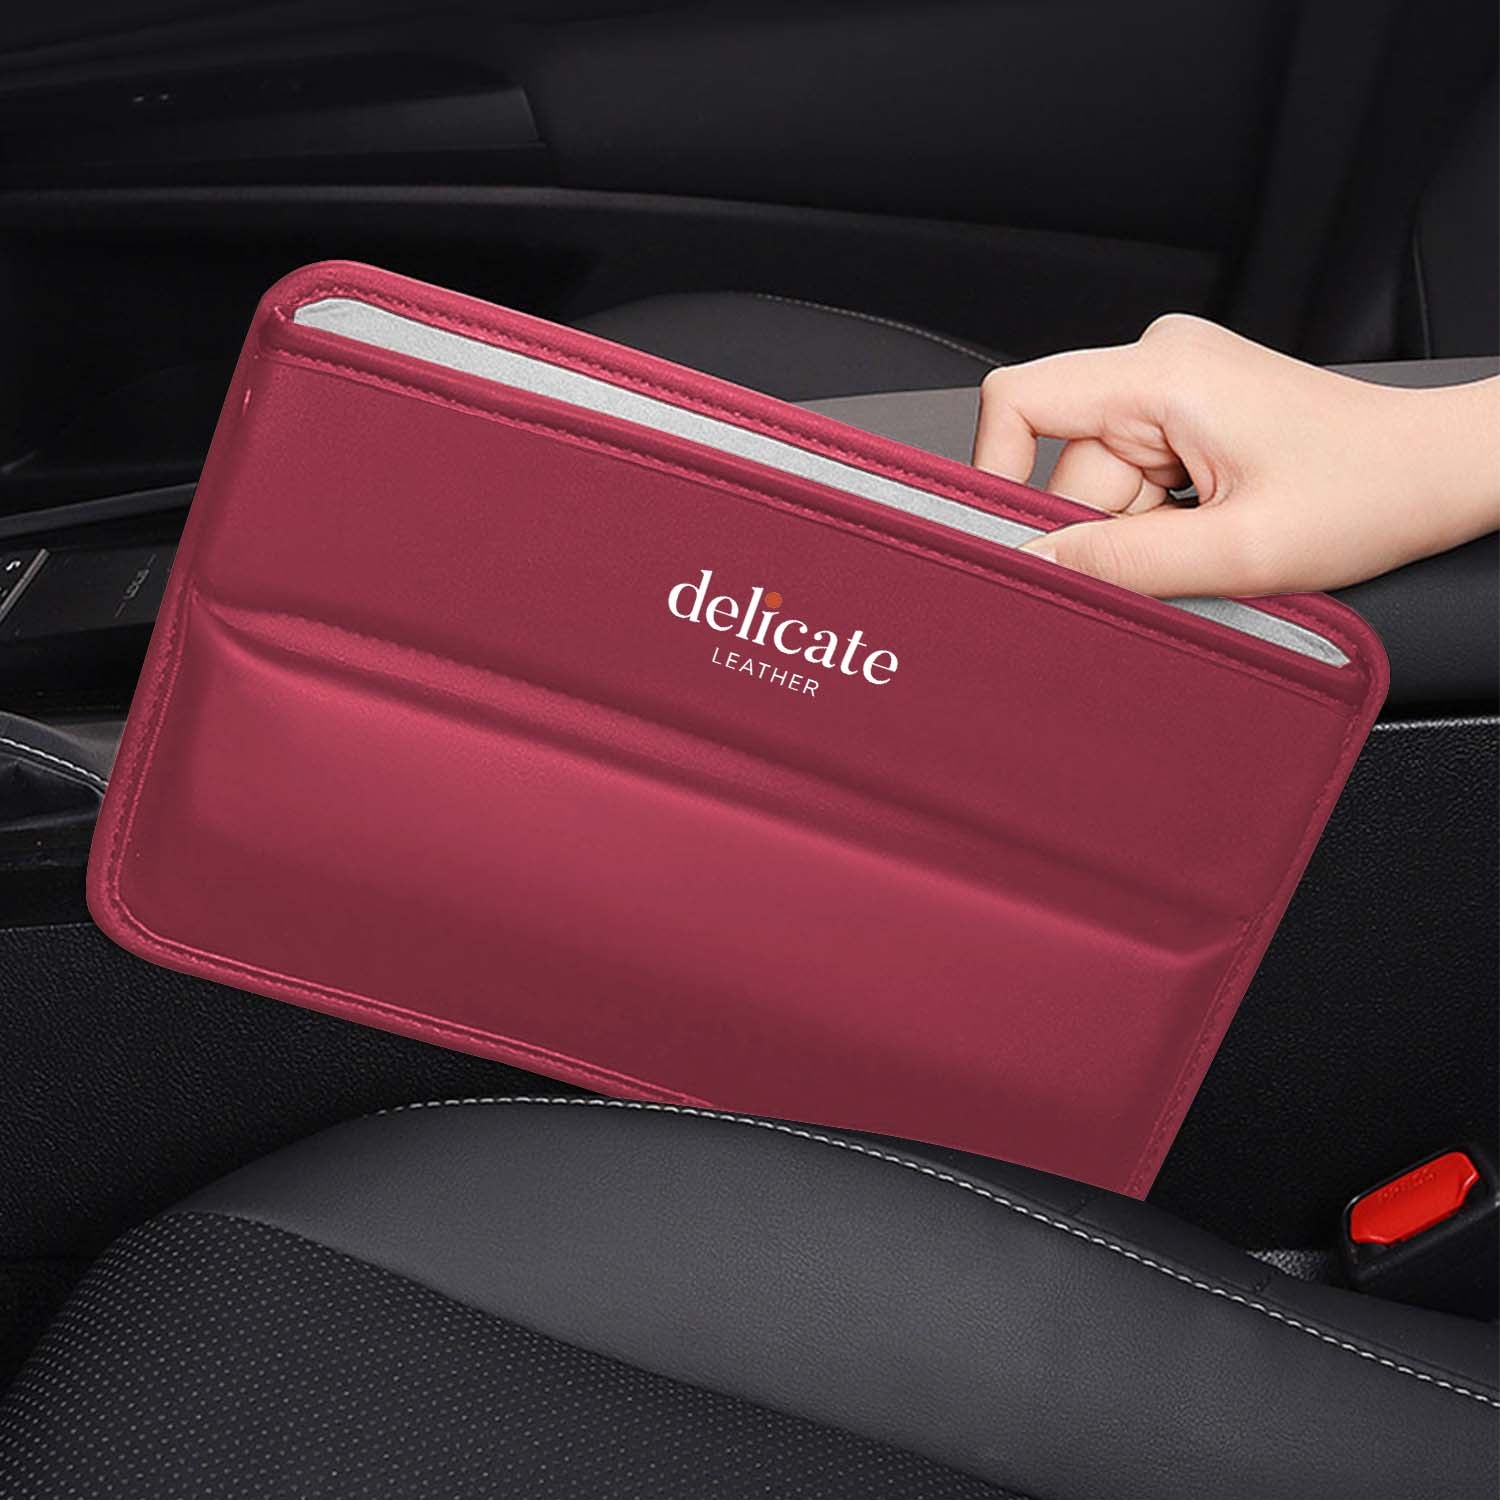 Car Seat Gap Filler Organizer, Custom Fit For Your Cars, Multifunctional PU Leather Console Side Pocket Organizer for Cellphones, Cards, Wallets, Keys